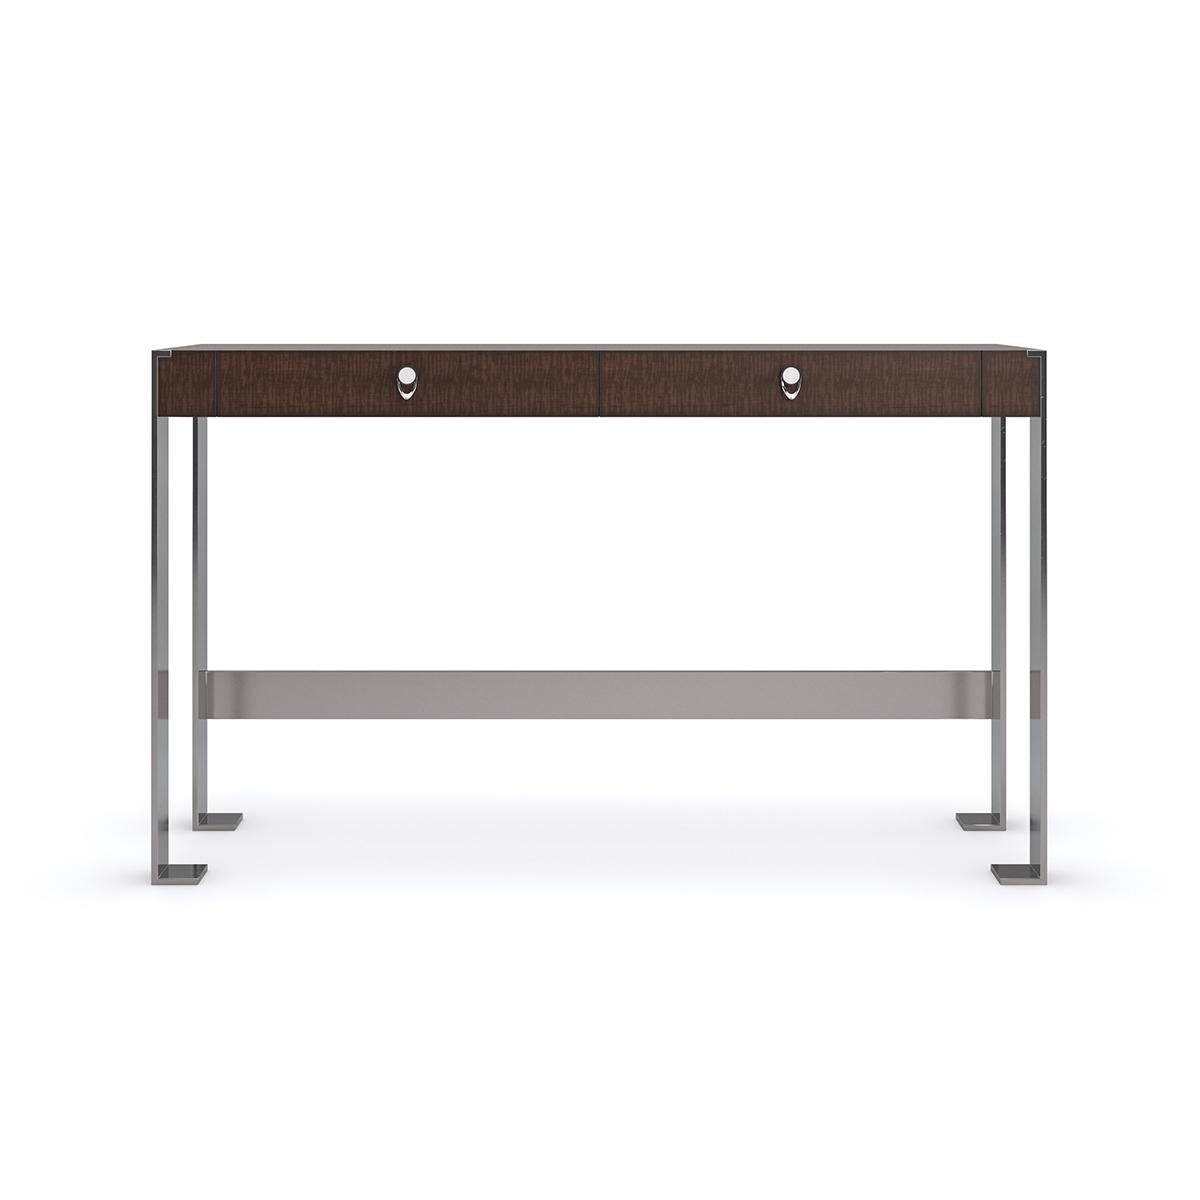 Modern Sycamore Console, a mix of figured sycamore veneers and metal. Features two drawers with contrasting Cloud White interiors. A mix of modern and industrial offers a versatile console or standing desk.

Dimensions: 68